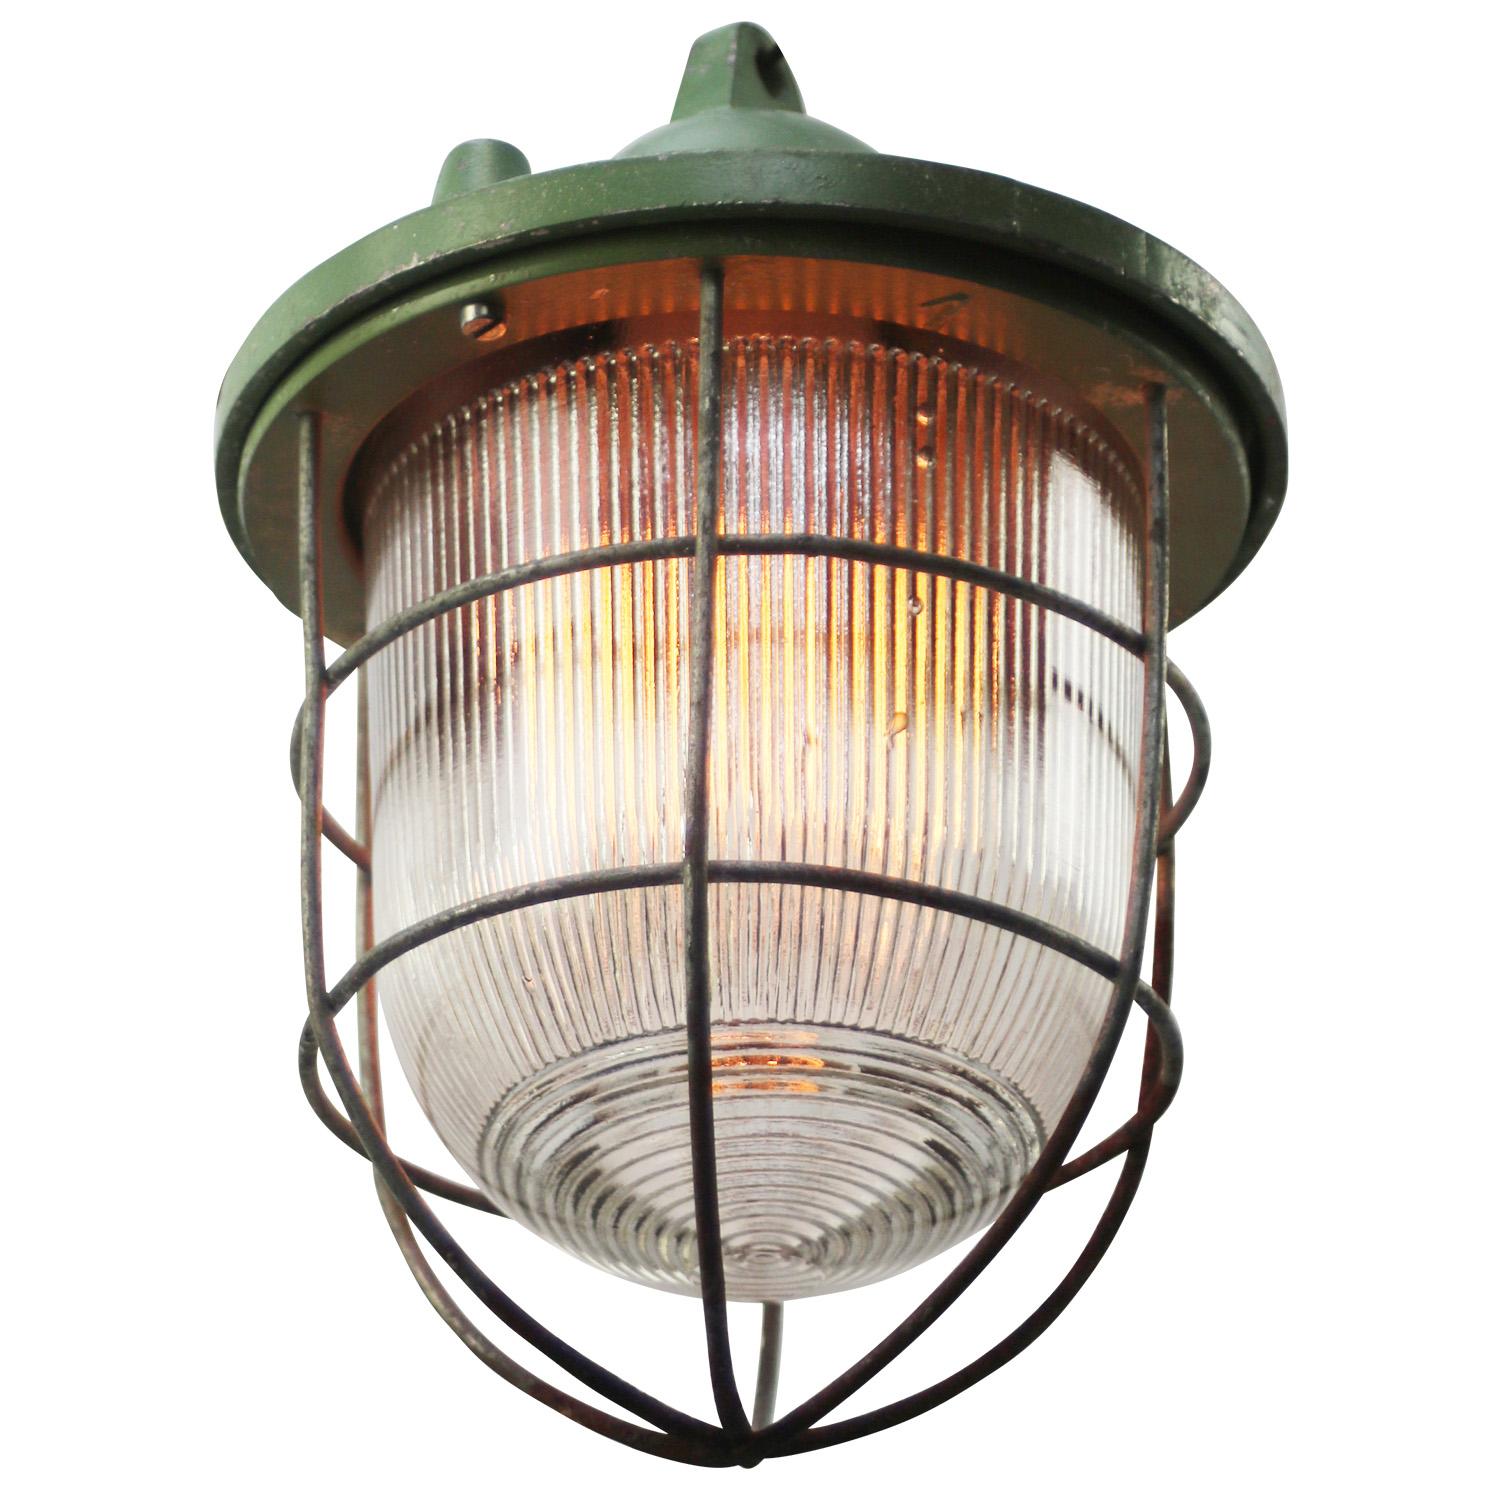 Industrial hanging lamp
clear striped glass
green cast aluminium top

Weight: 2.90 kg / 6.4 lb

Priced per individual item. All lamps have been made suitable by international standards for incandescent light bulbs, energy-efficient and LED bulbs.